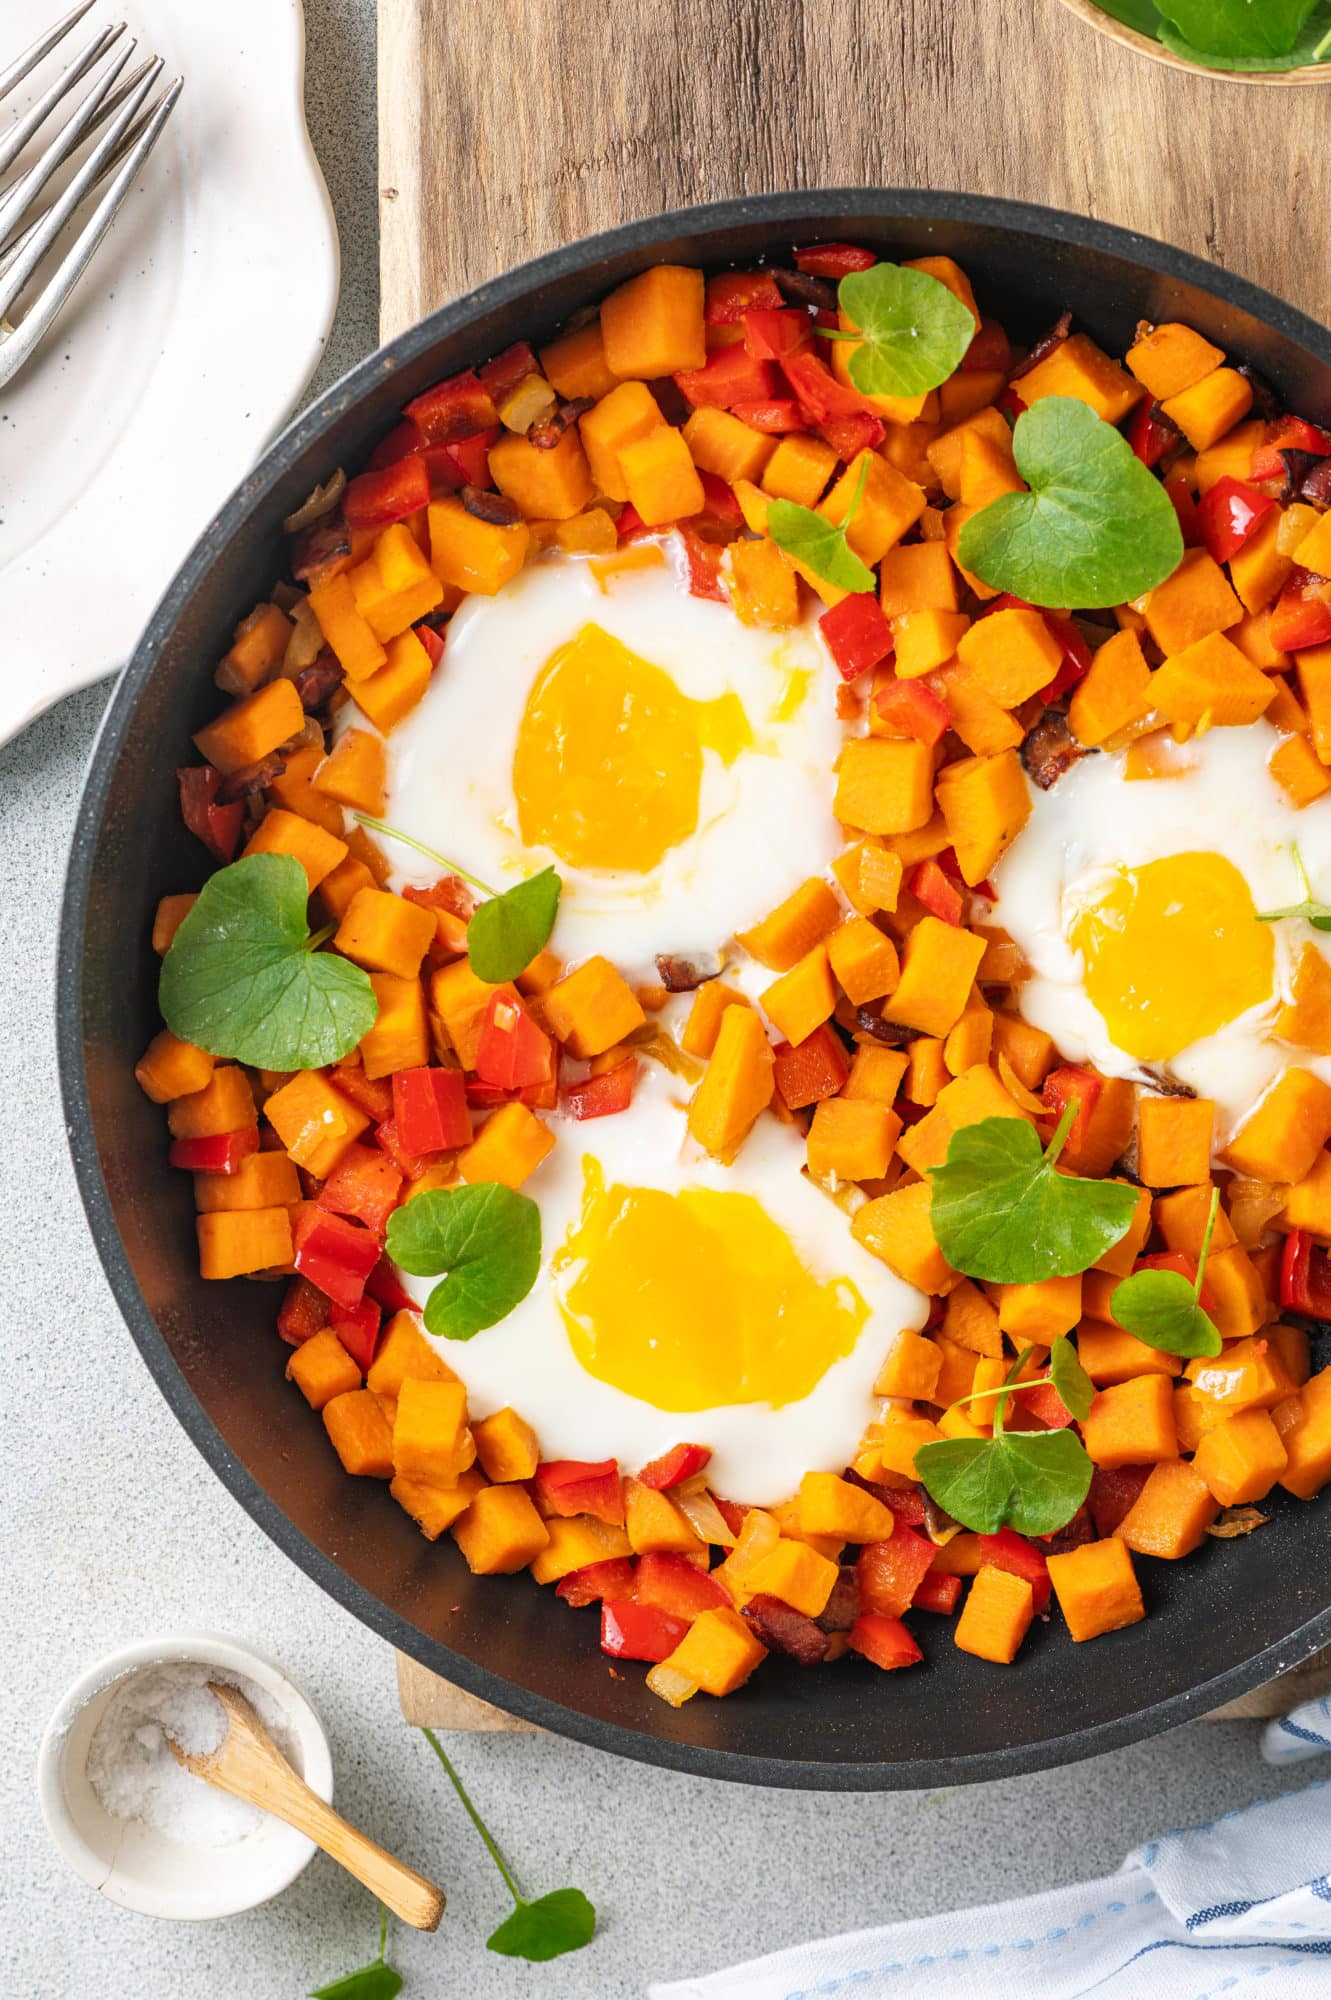 wooden-cutting-board-under-a-black-skillet-filled-with-red-pepper-sweet-potatoes-runny-eggs-and-watercress-and-silver-forks-on-a-white-plate-and-a-small-bowl-of-salt-with-a-small-wooden-spoon-and-a-striped-towel